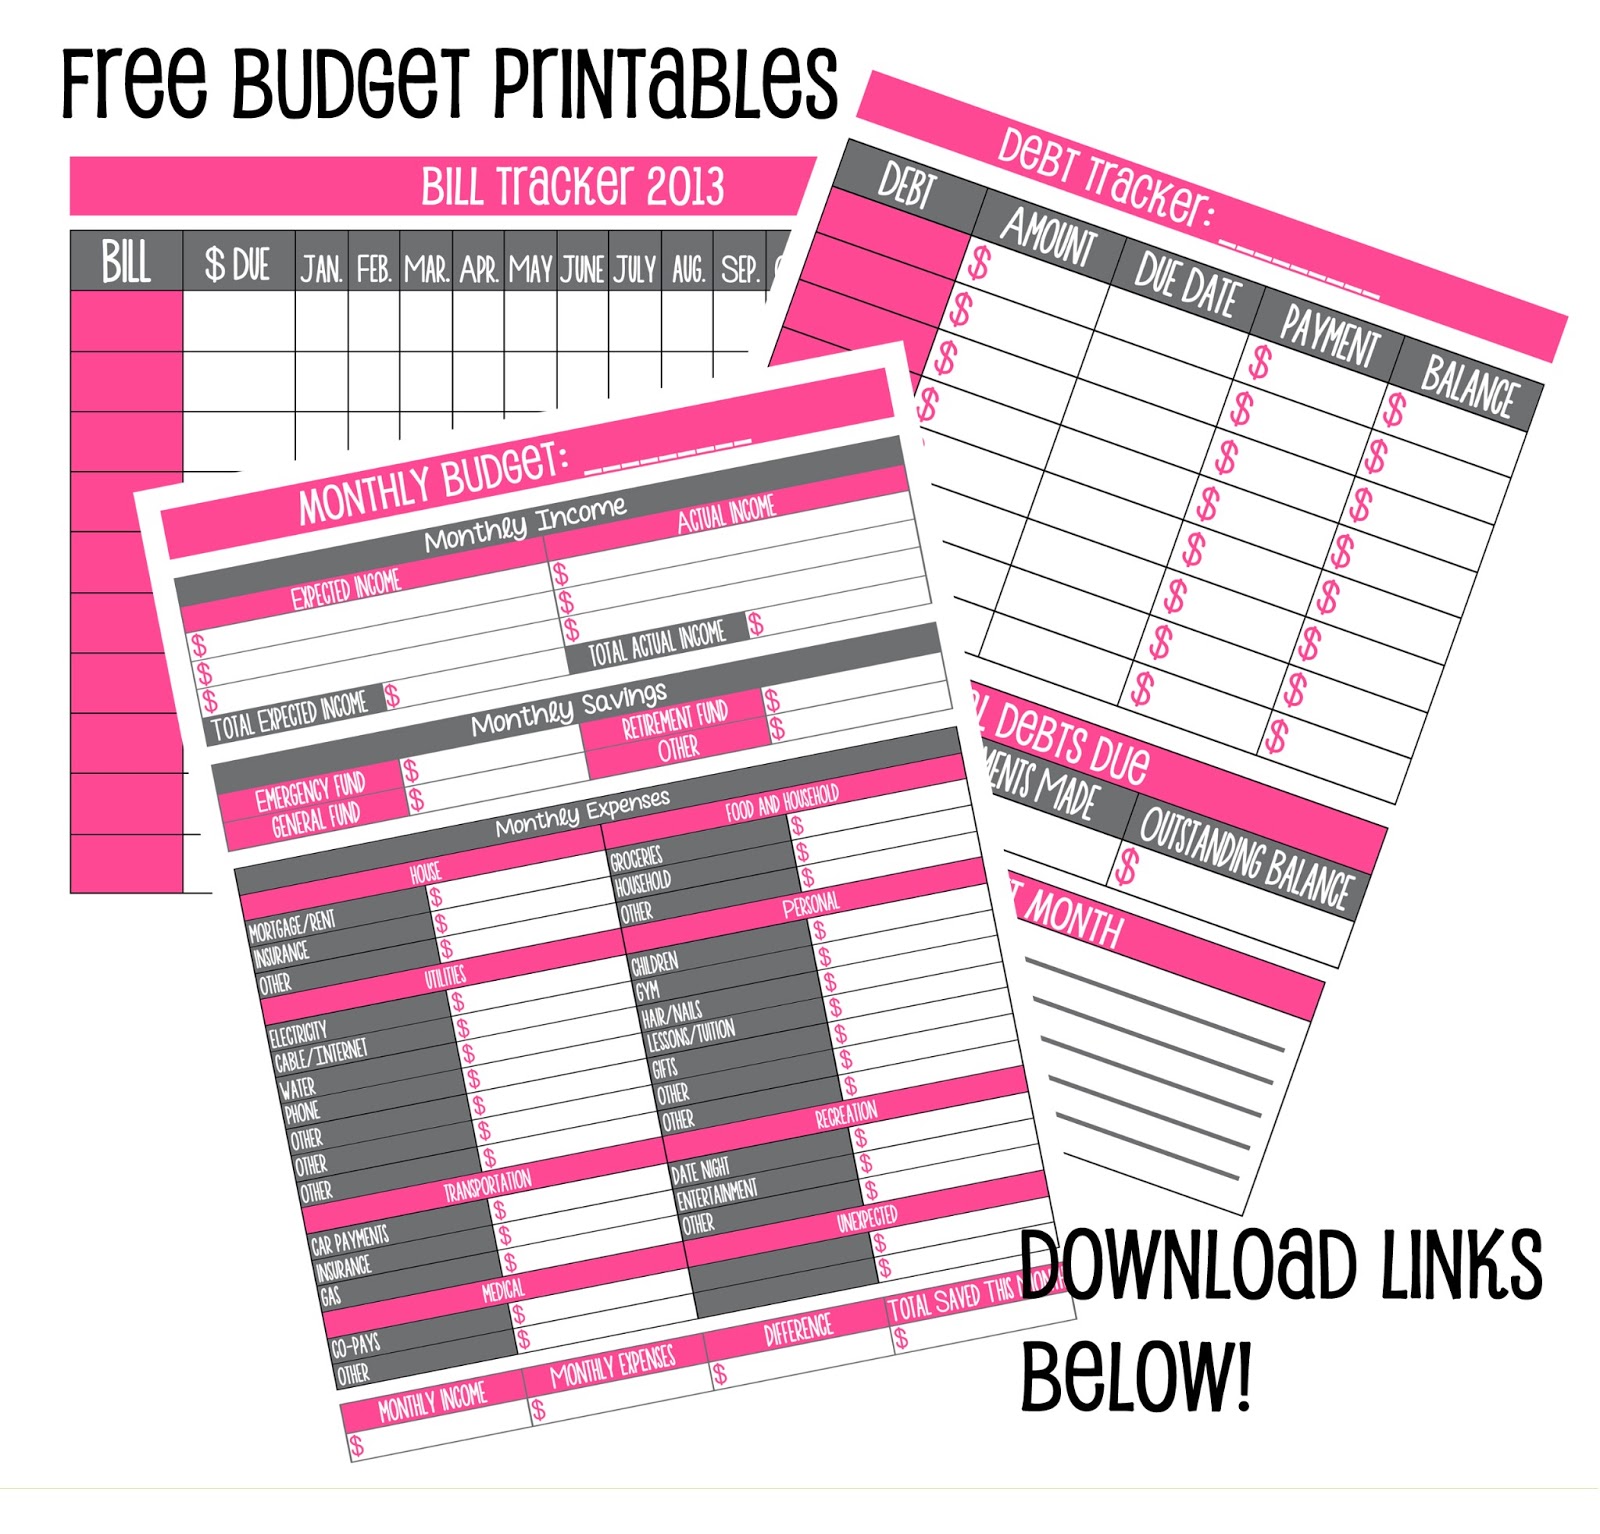 6 Best Images of Free Printable Budget For Bills - Printable Monthly